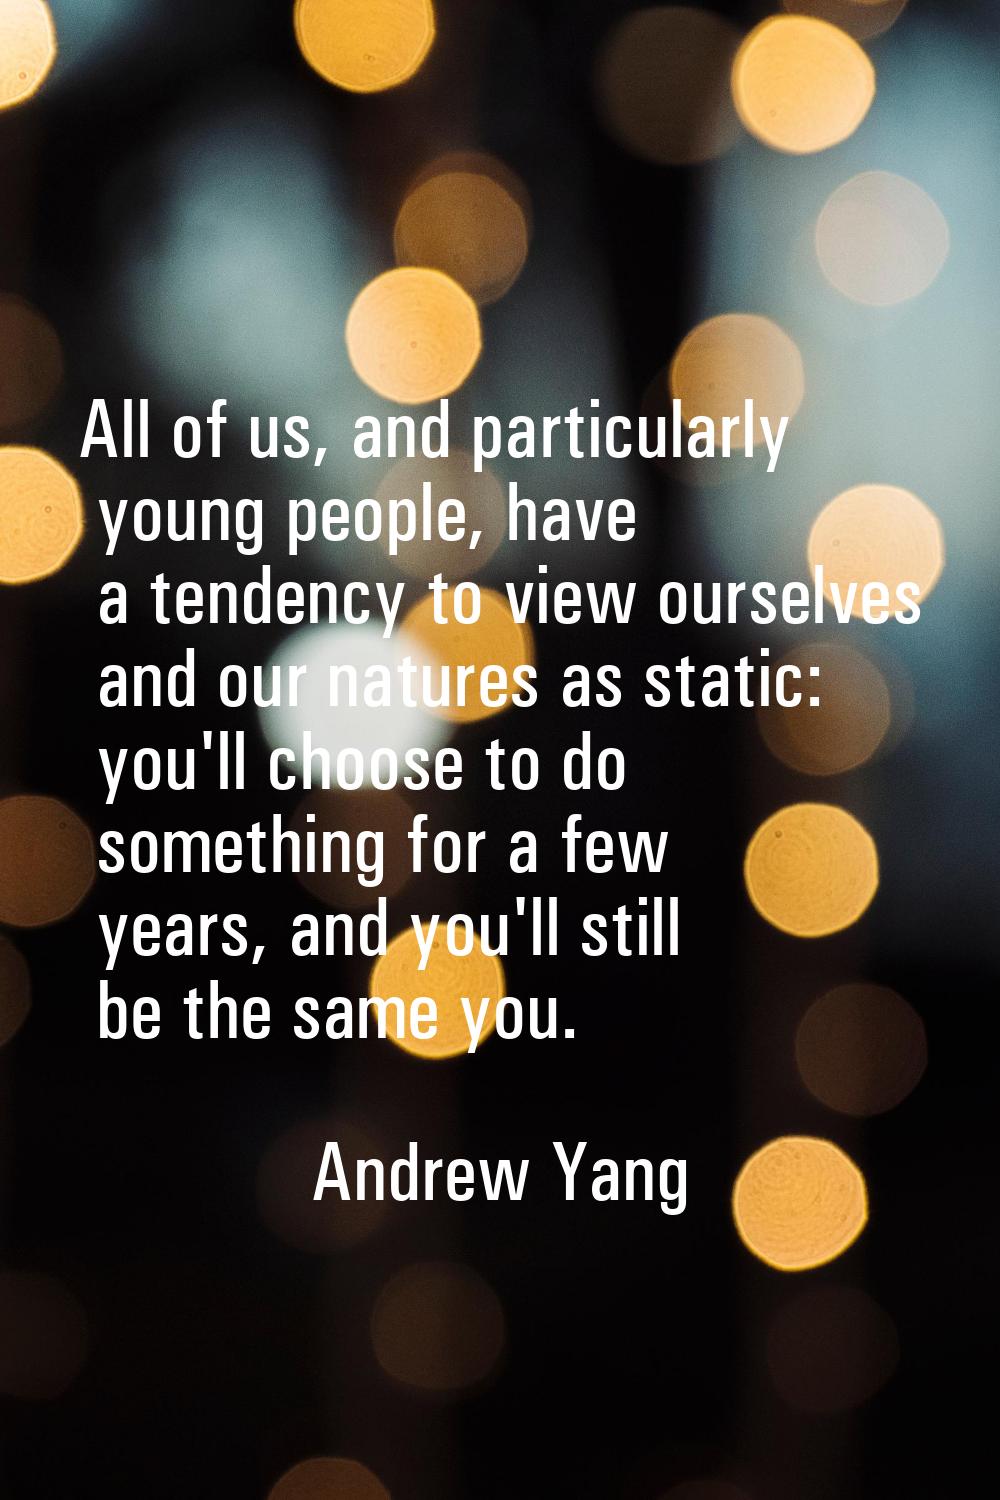 All of us, and particularly young people, have a tendency to view ourselves and our natures as stat